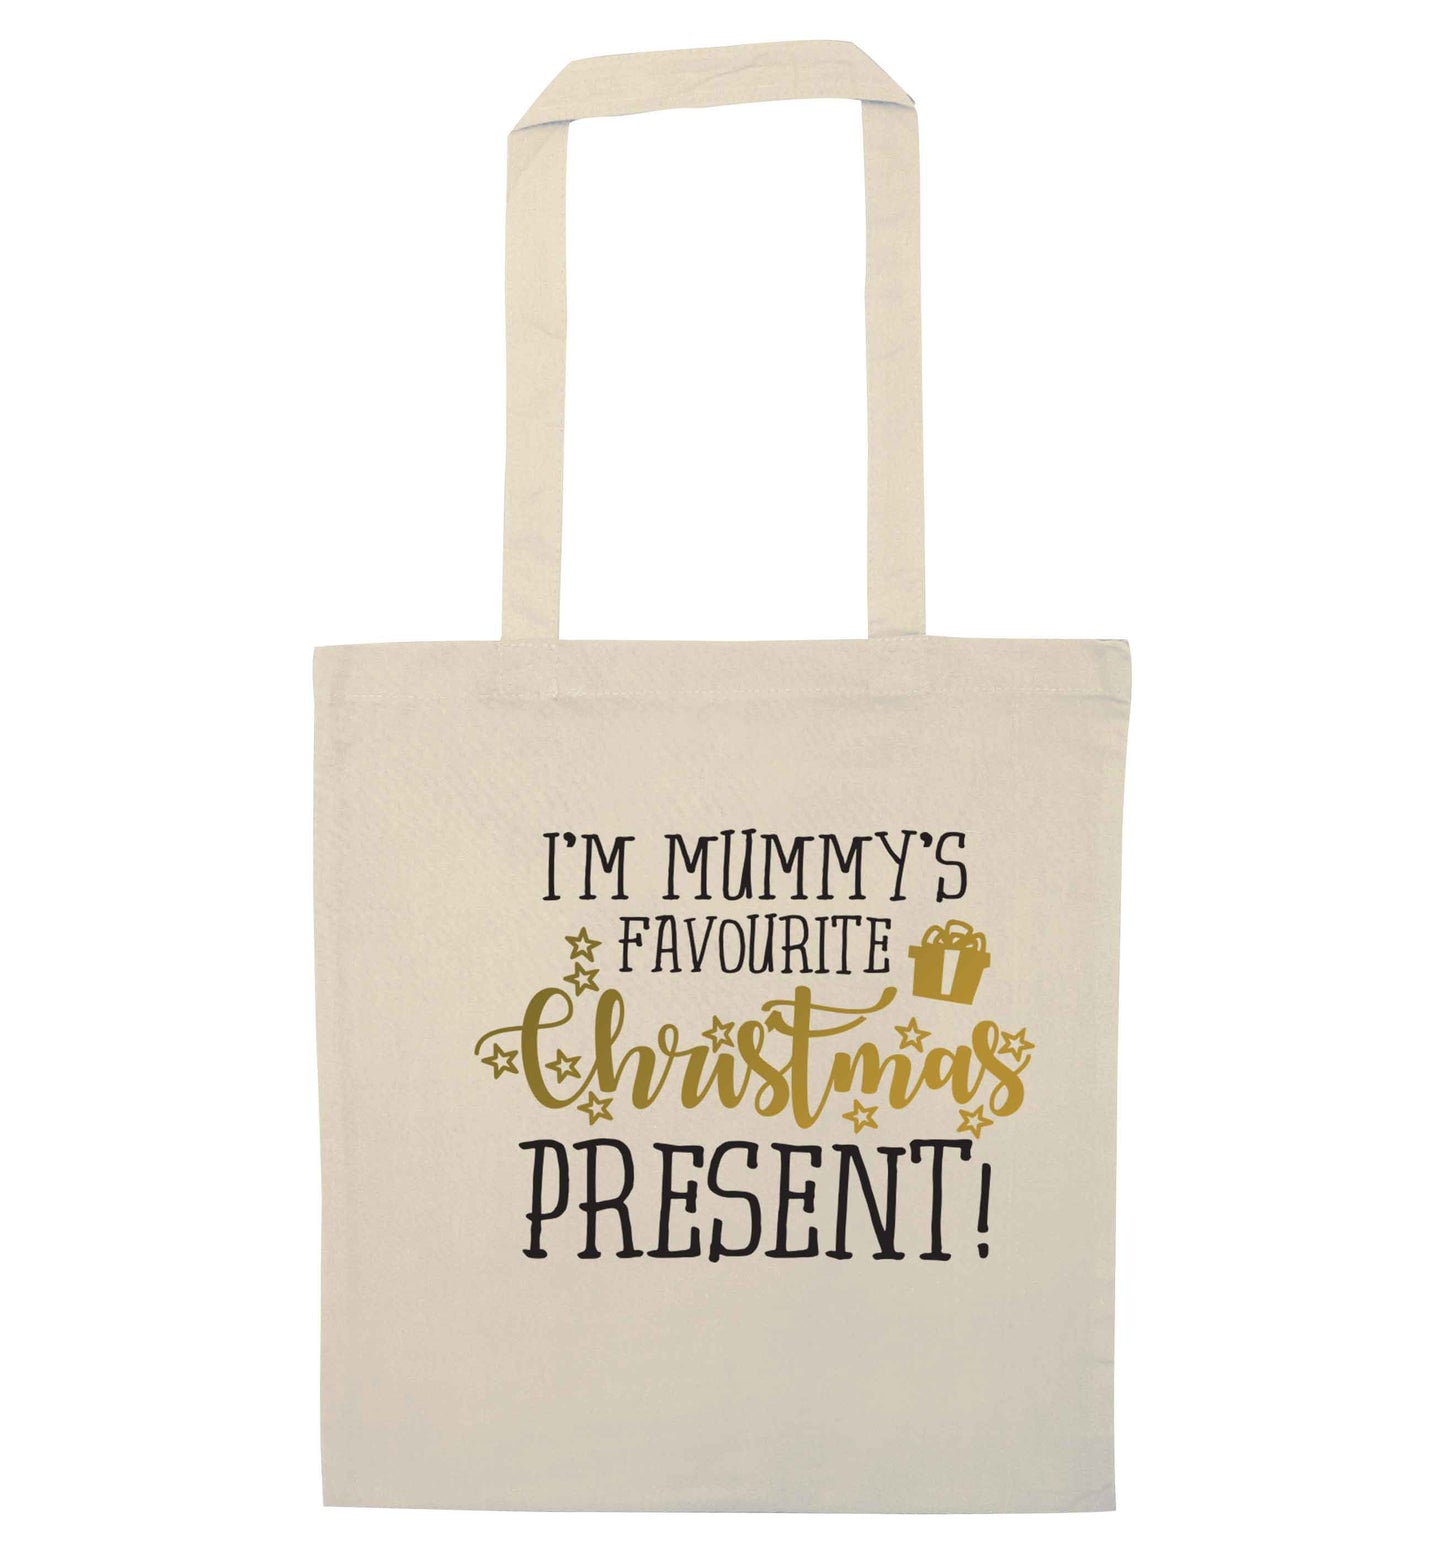 I'm Mummy's favourite Christmas present natural tote bag